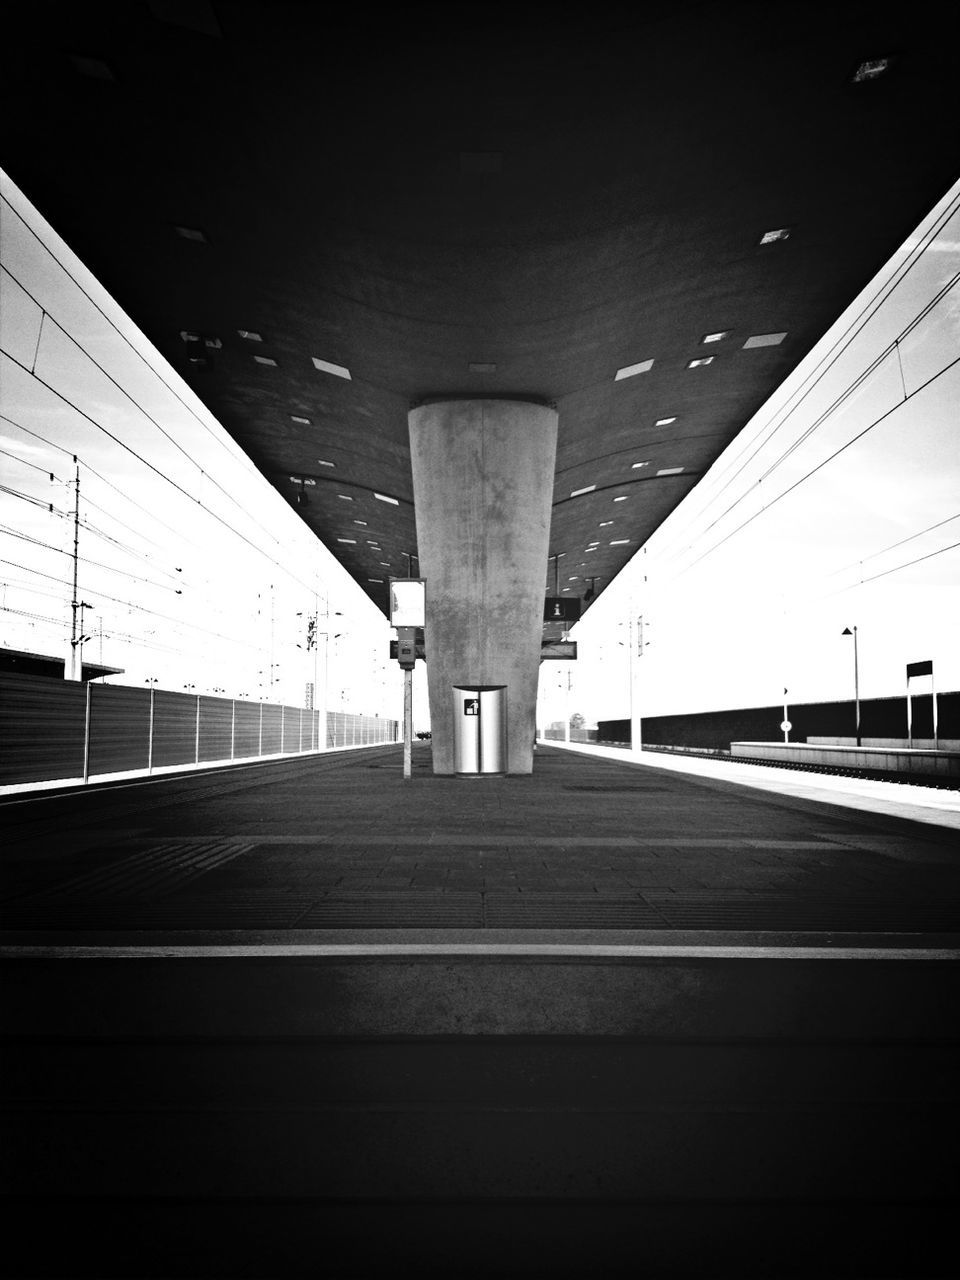 the way forward, transportation, built structure, architecture, diminishing perspective, indoors, bridge - man made structure, connection, long, ceiling, railroad station platform, vanishing point, empty, tunnel, railroad station, railroad track, illuminated, railing, engineering, architectural column